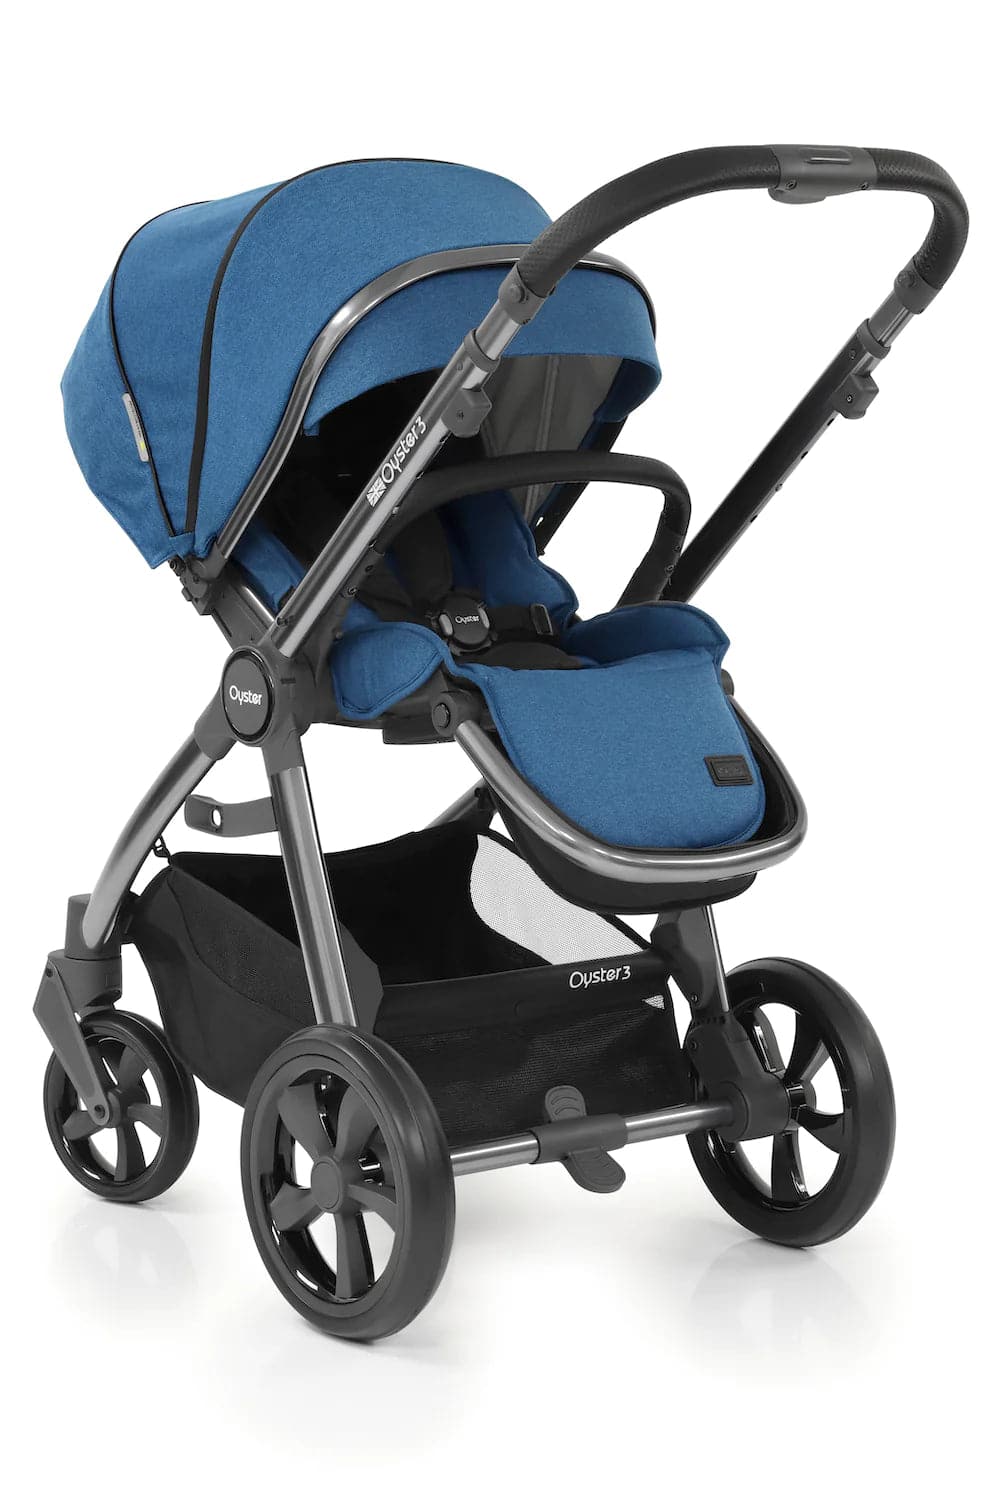 BabyStyle Oyster 3 Pushchair - Kingfisher - For Your Little One